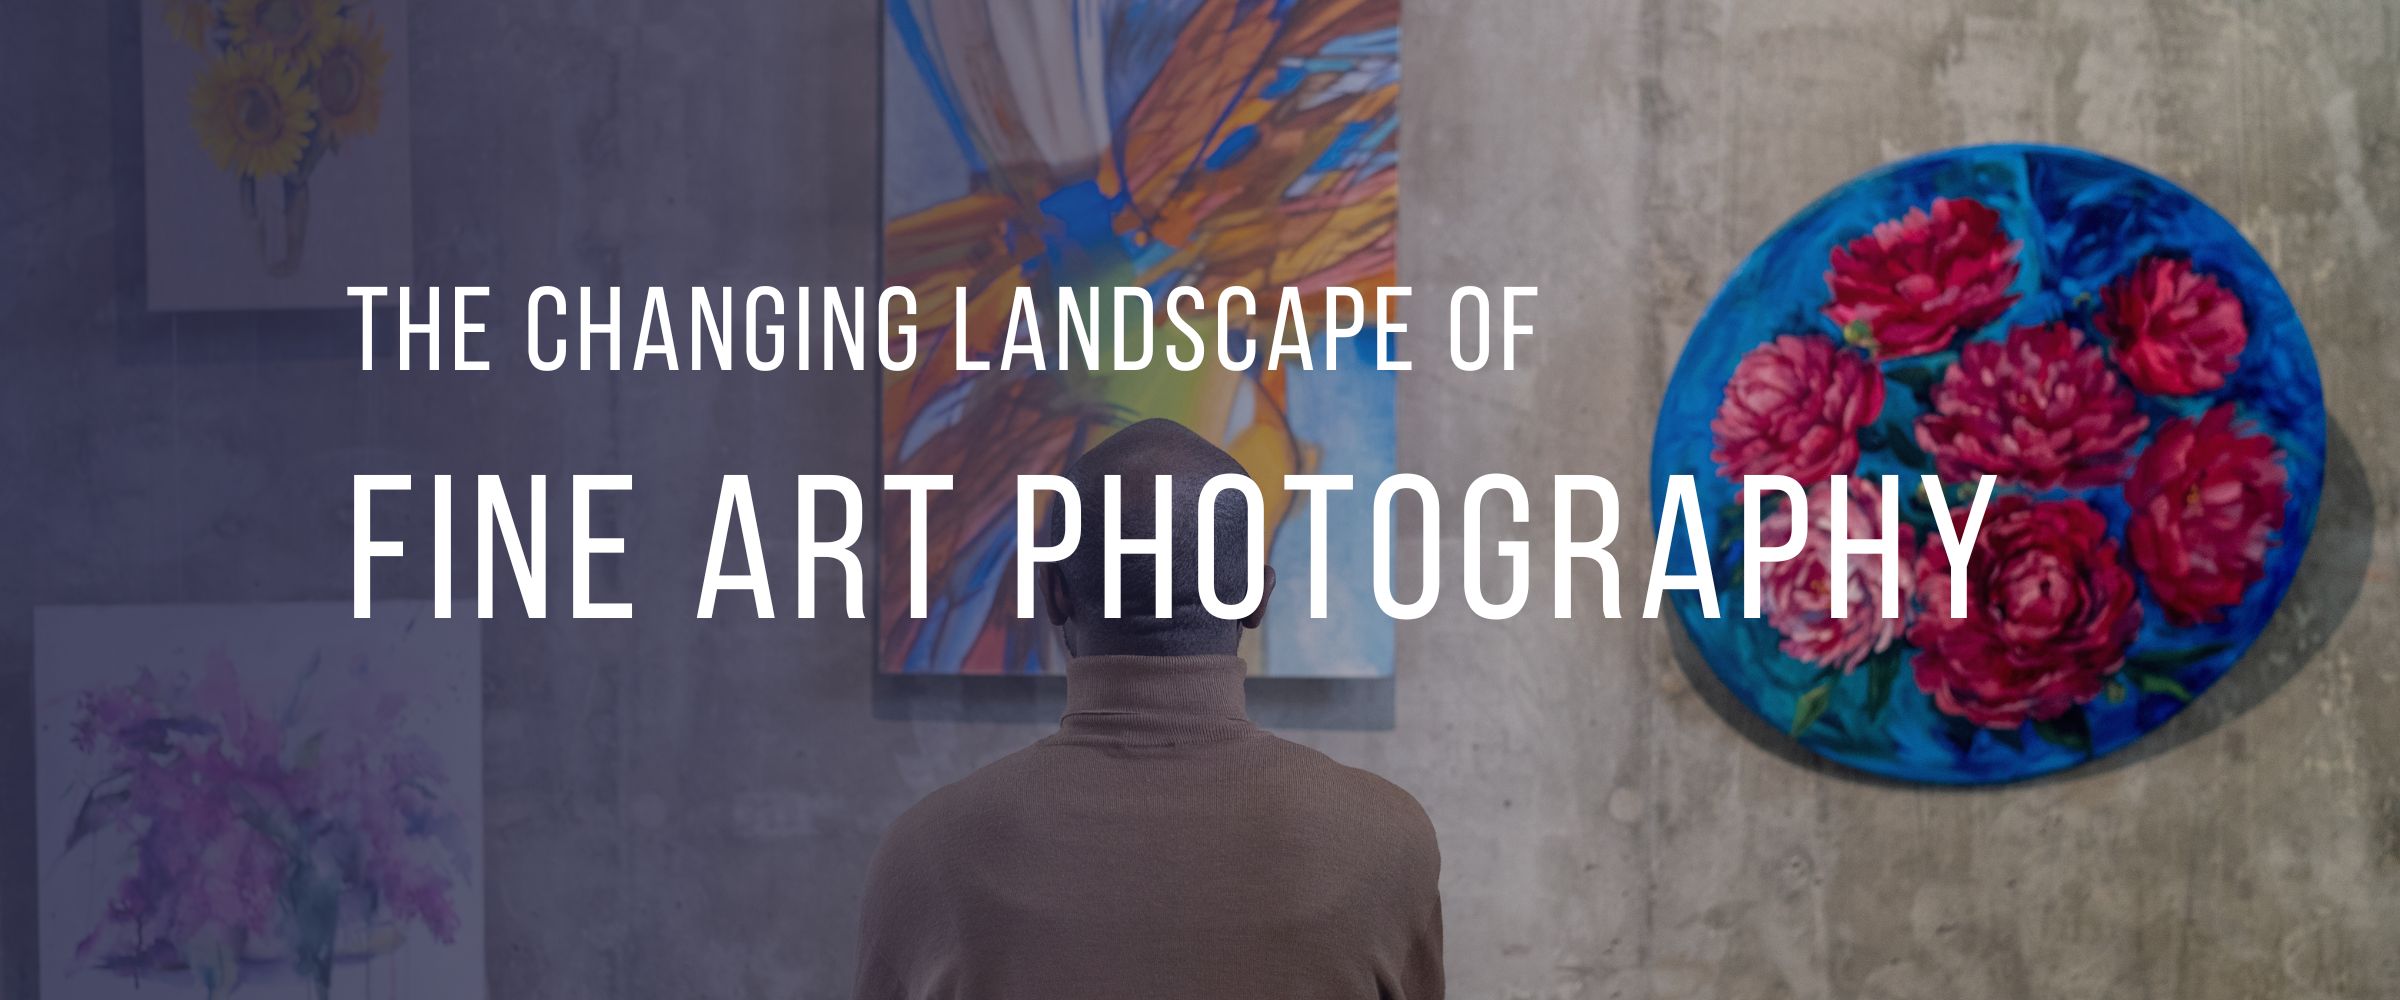 From Gallery Walls to Instagram: The Changing Landscape of Fine Art Photography